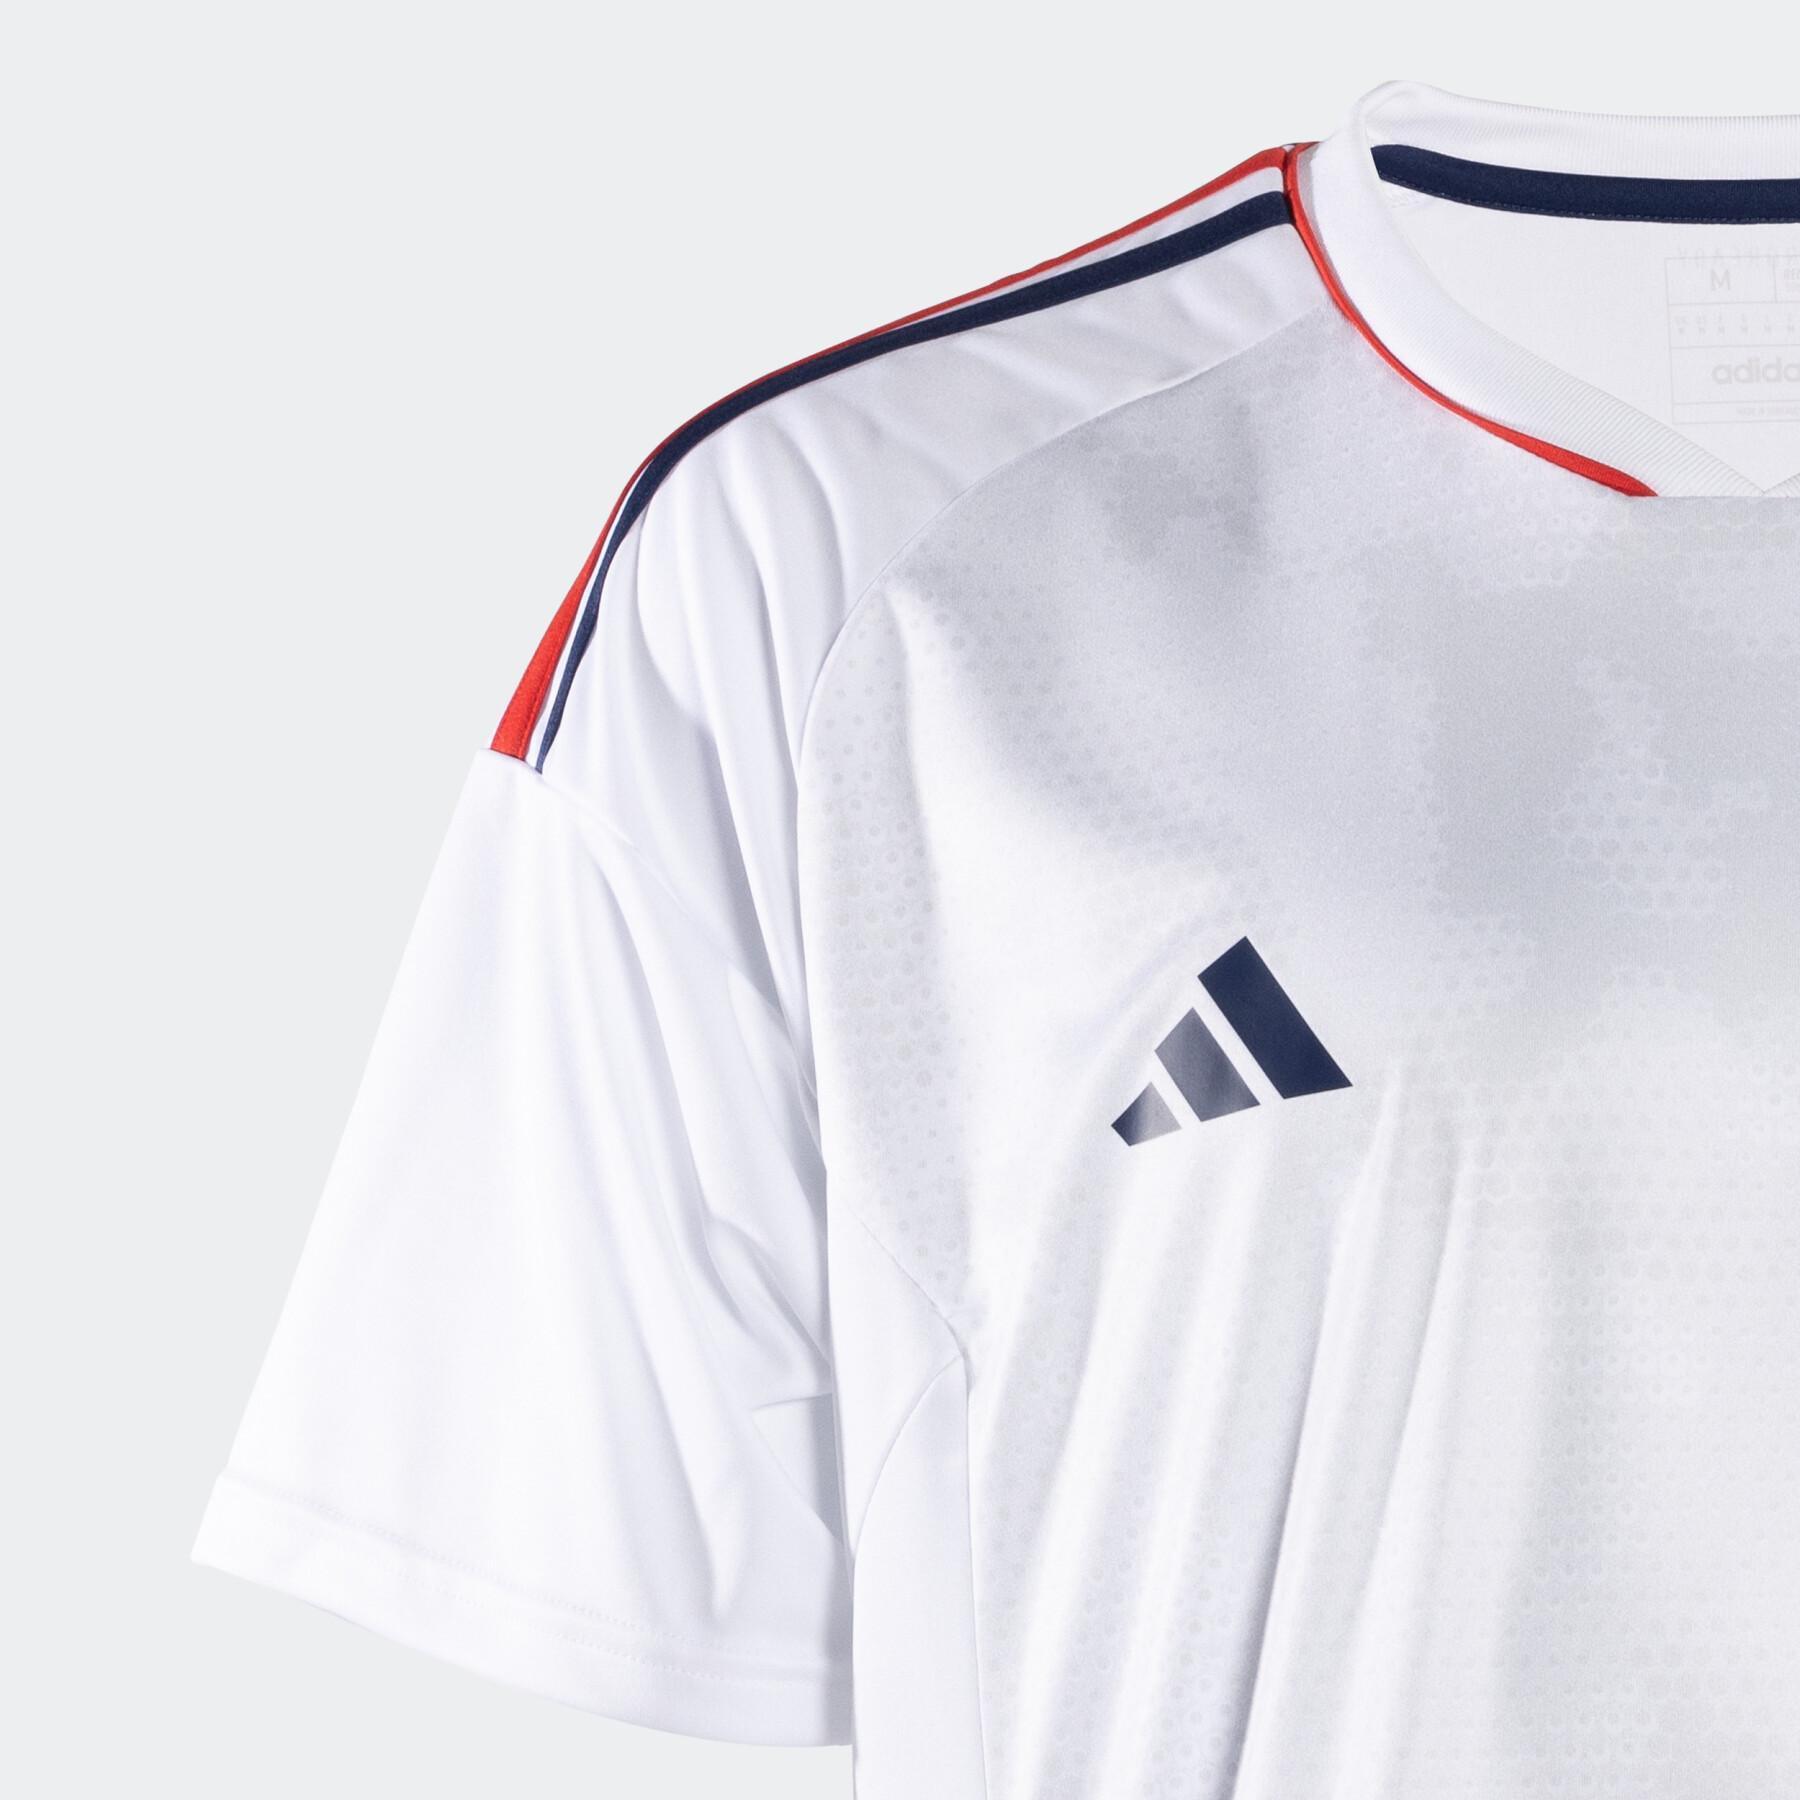 Official away jersey of the French team France 2023/24